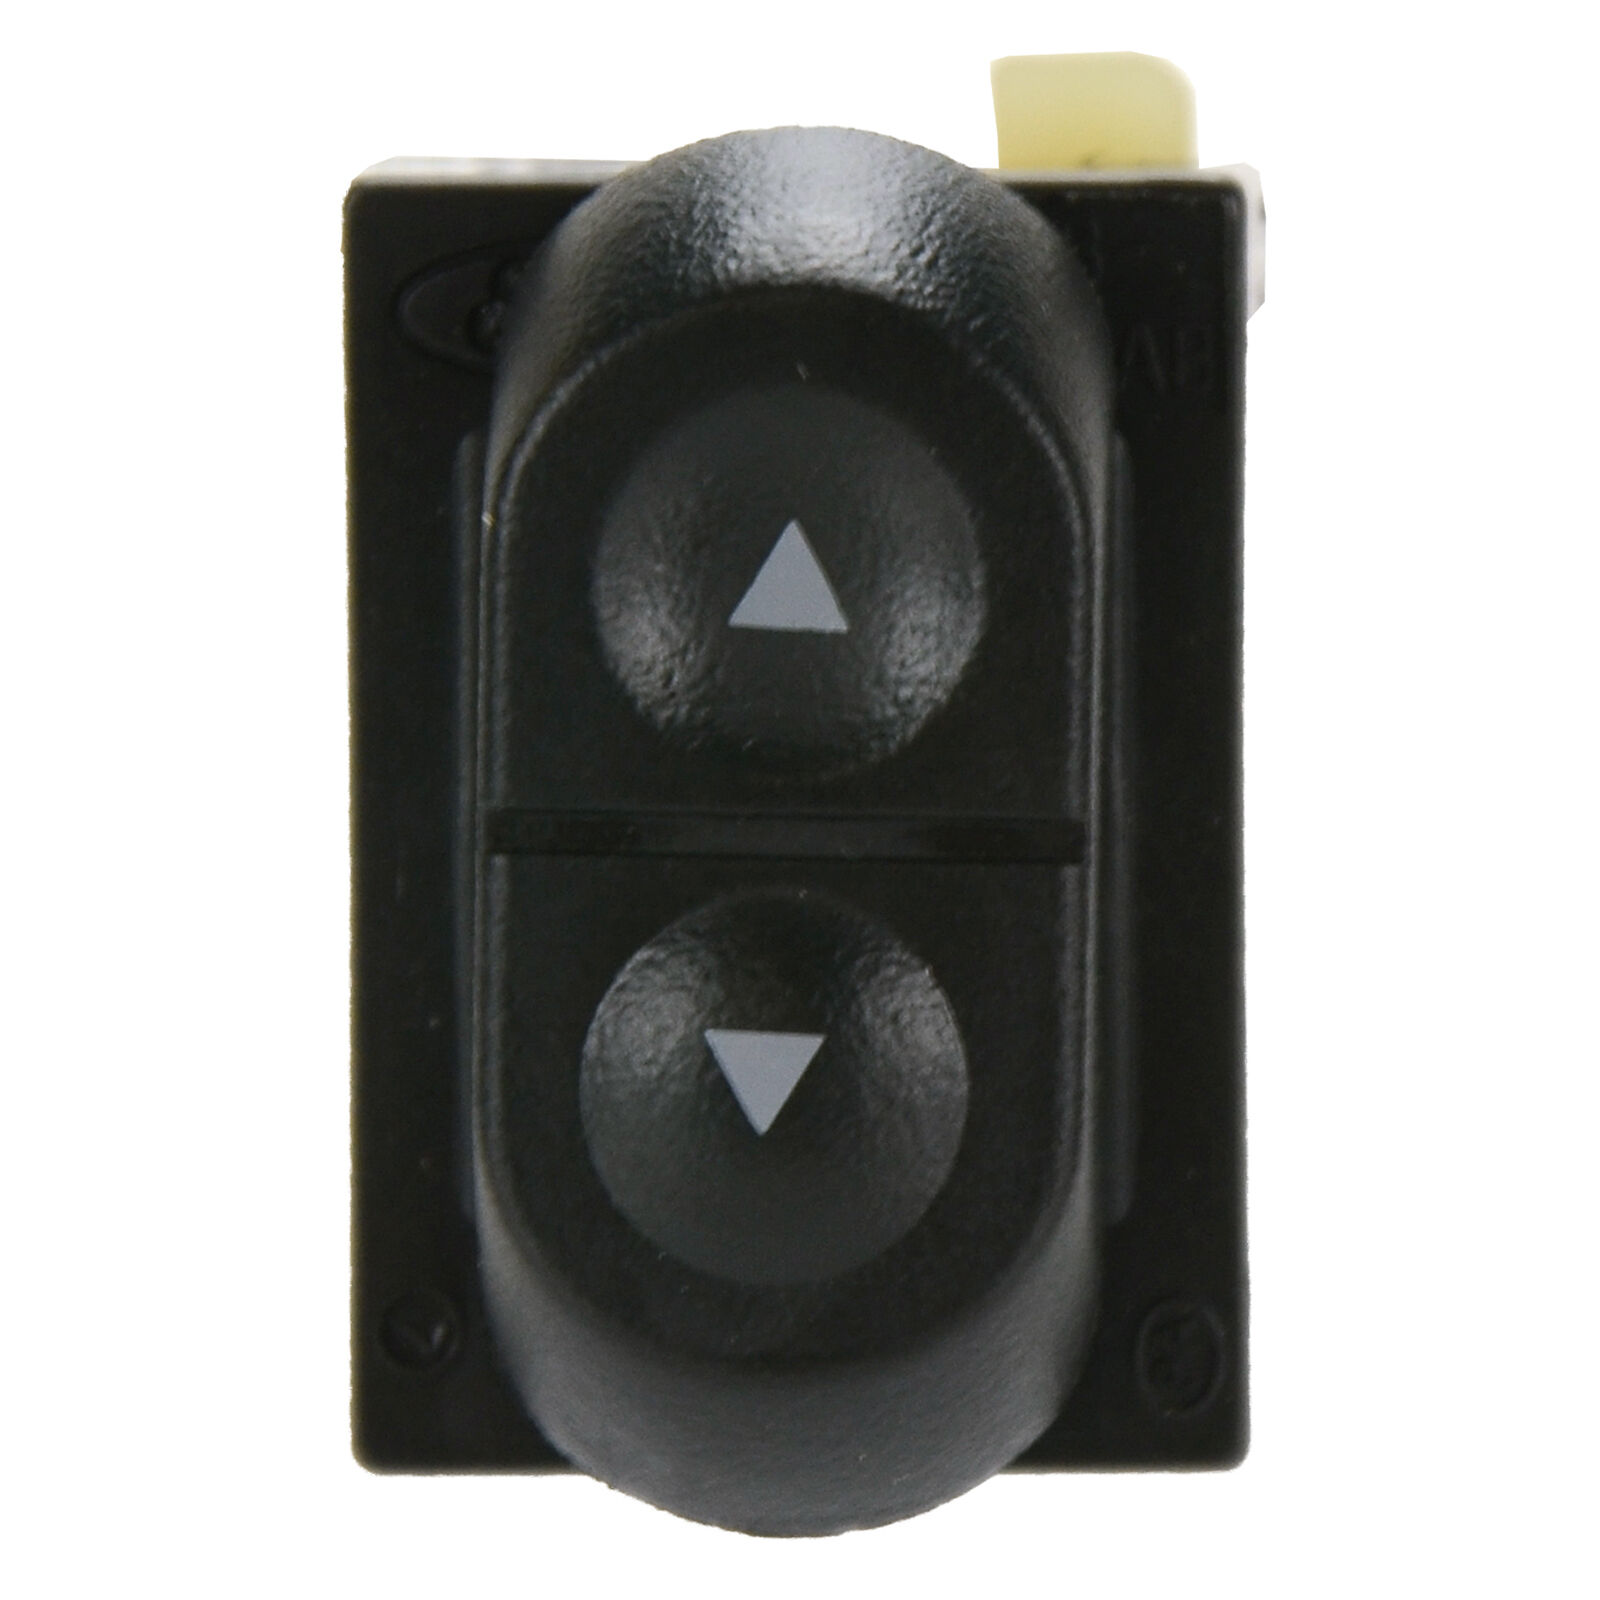 NEW OEM Ford Window Up/Down Button, Switch- Many Applications- Right or Left